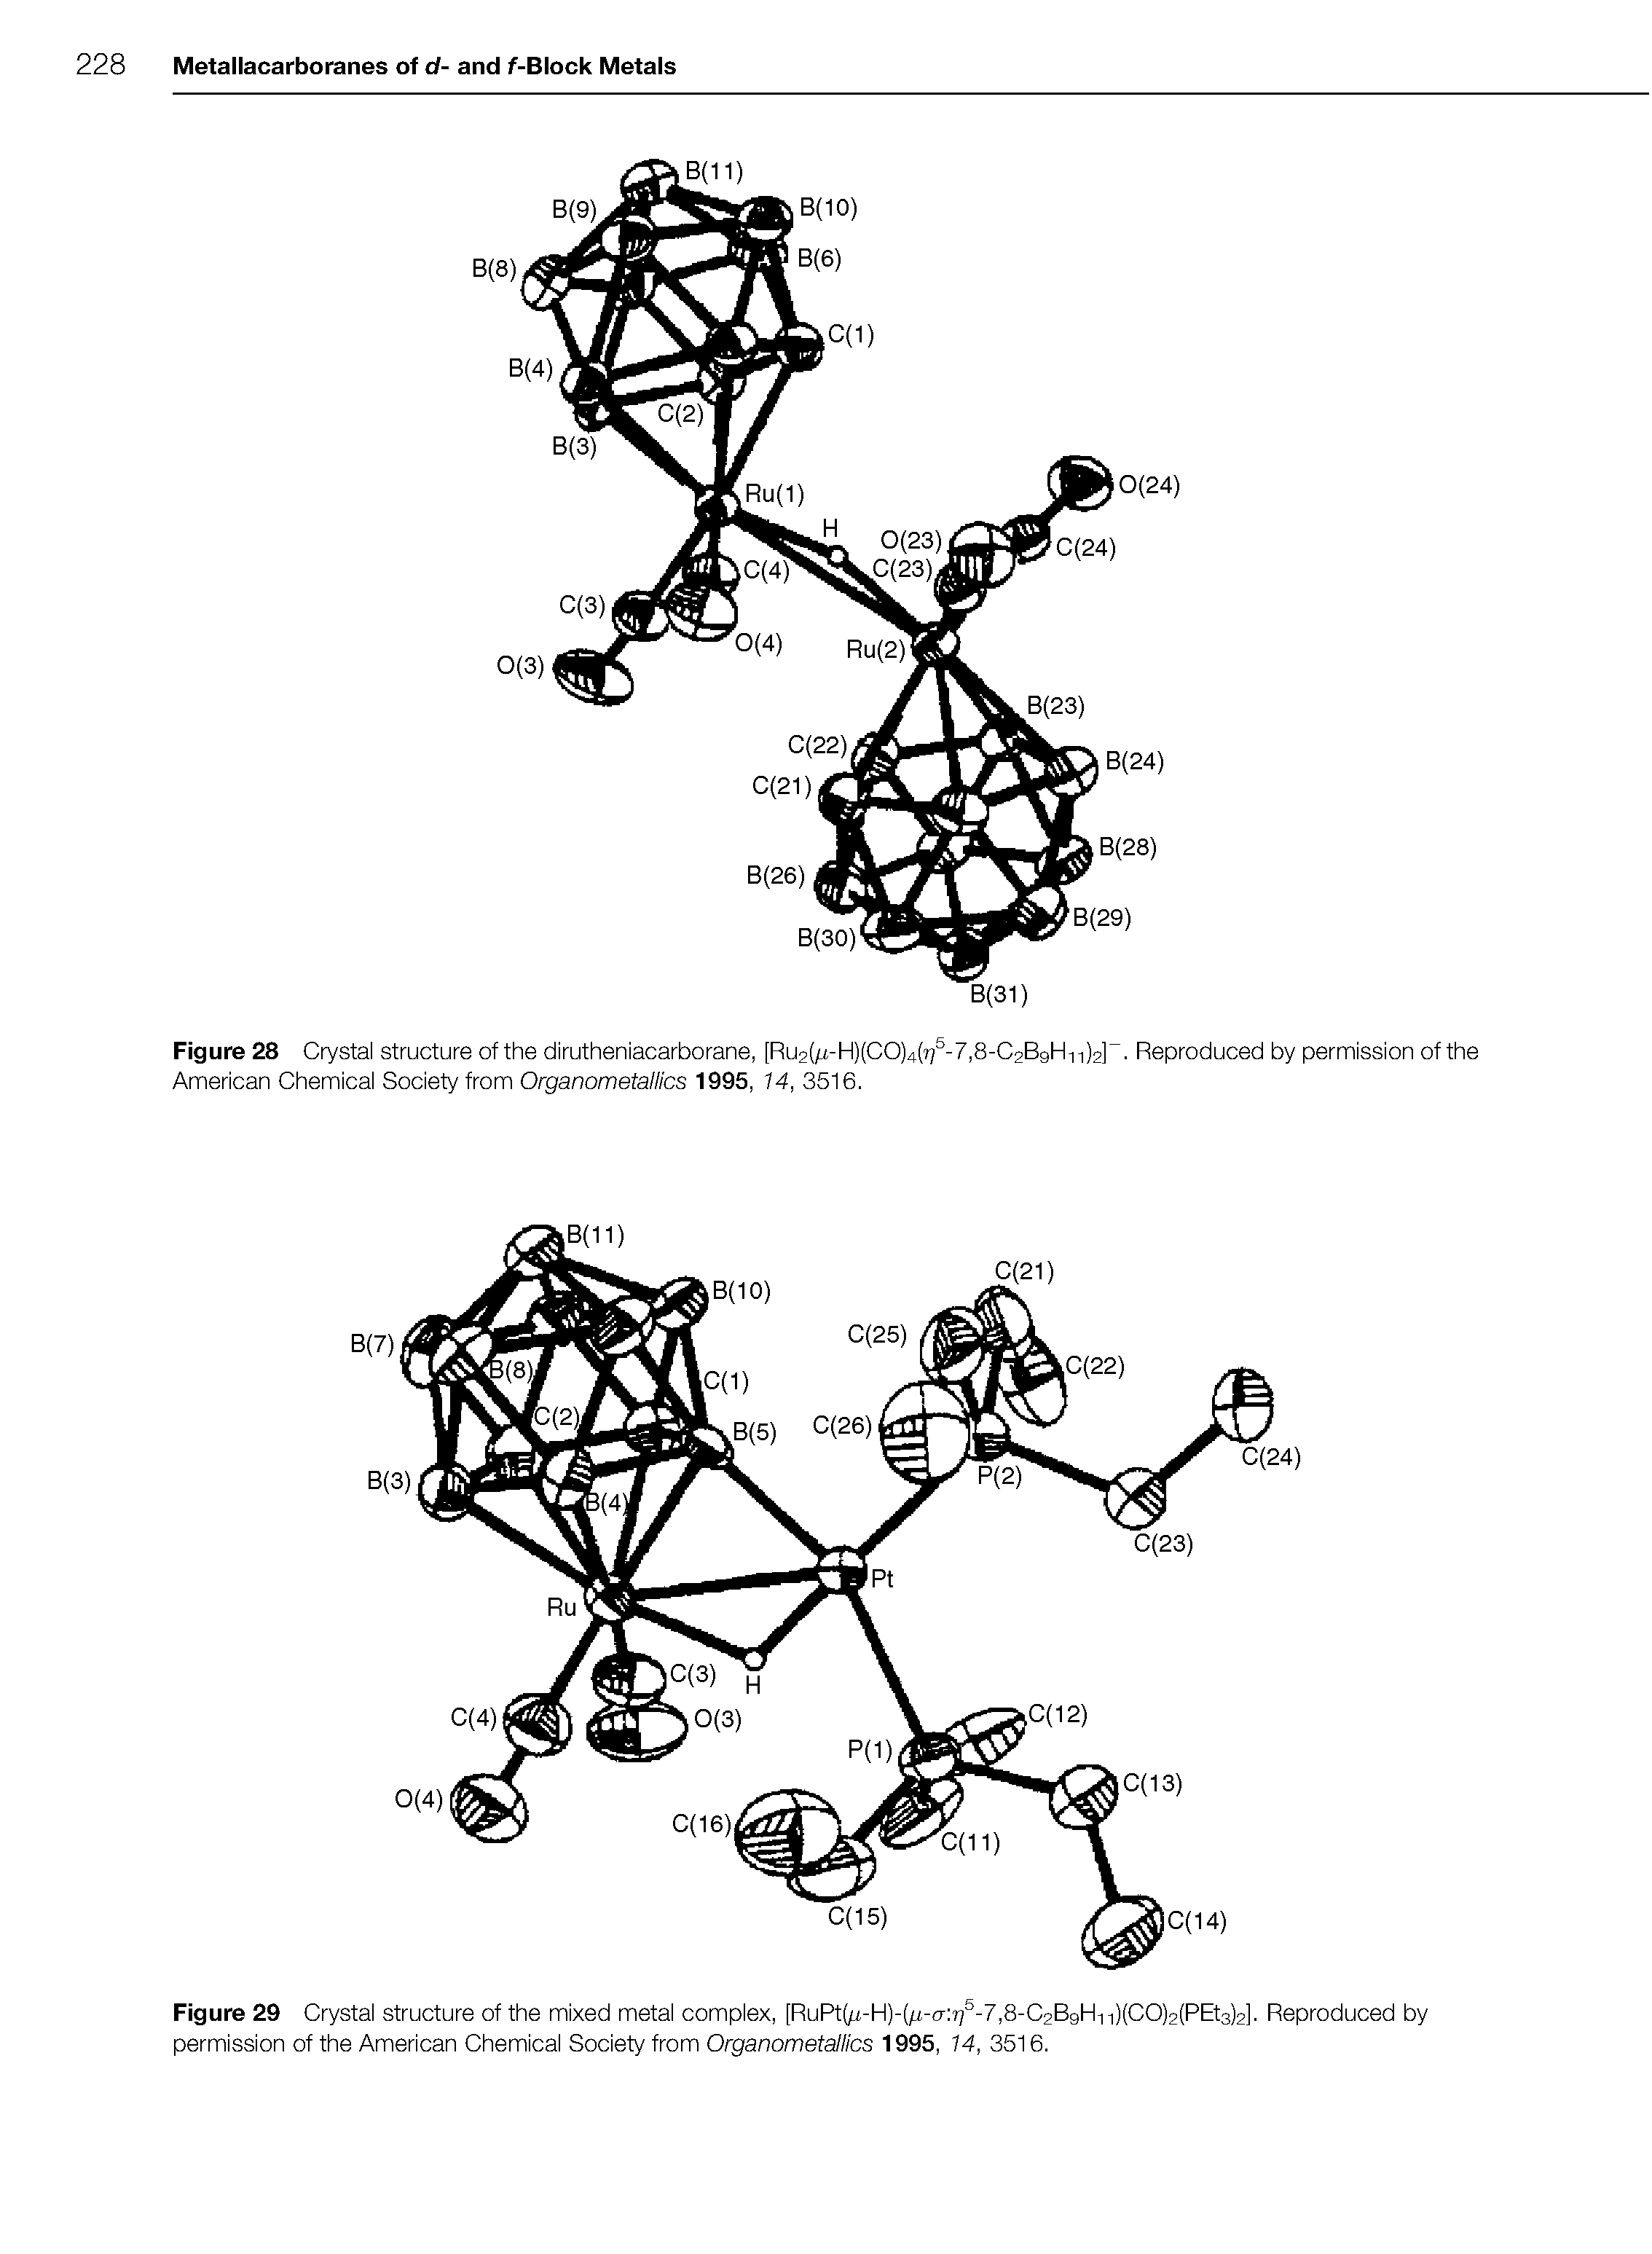 Figure 29 Crystal structure of the mixed metal complex, [RuPt(/i-HH/i-o- rj5-7,8-C2B9H-n)(CO)2(PEt3)2]. Reproduced by permission of the American Chemical Society from Organometallics 1995, 14, 3516.